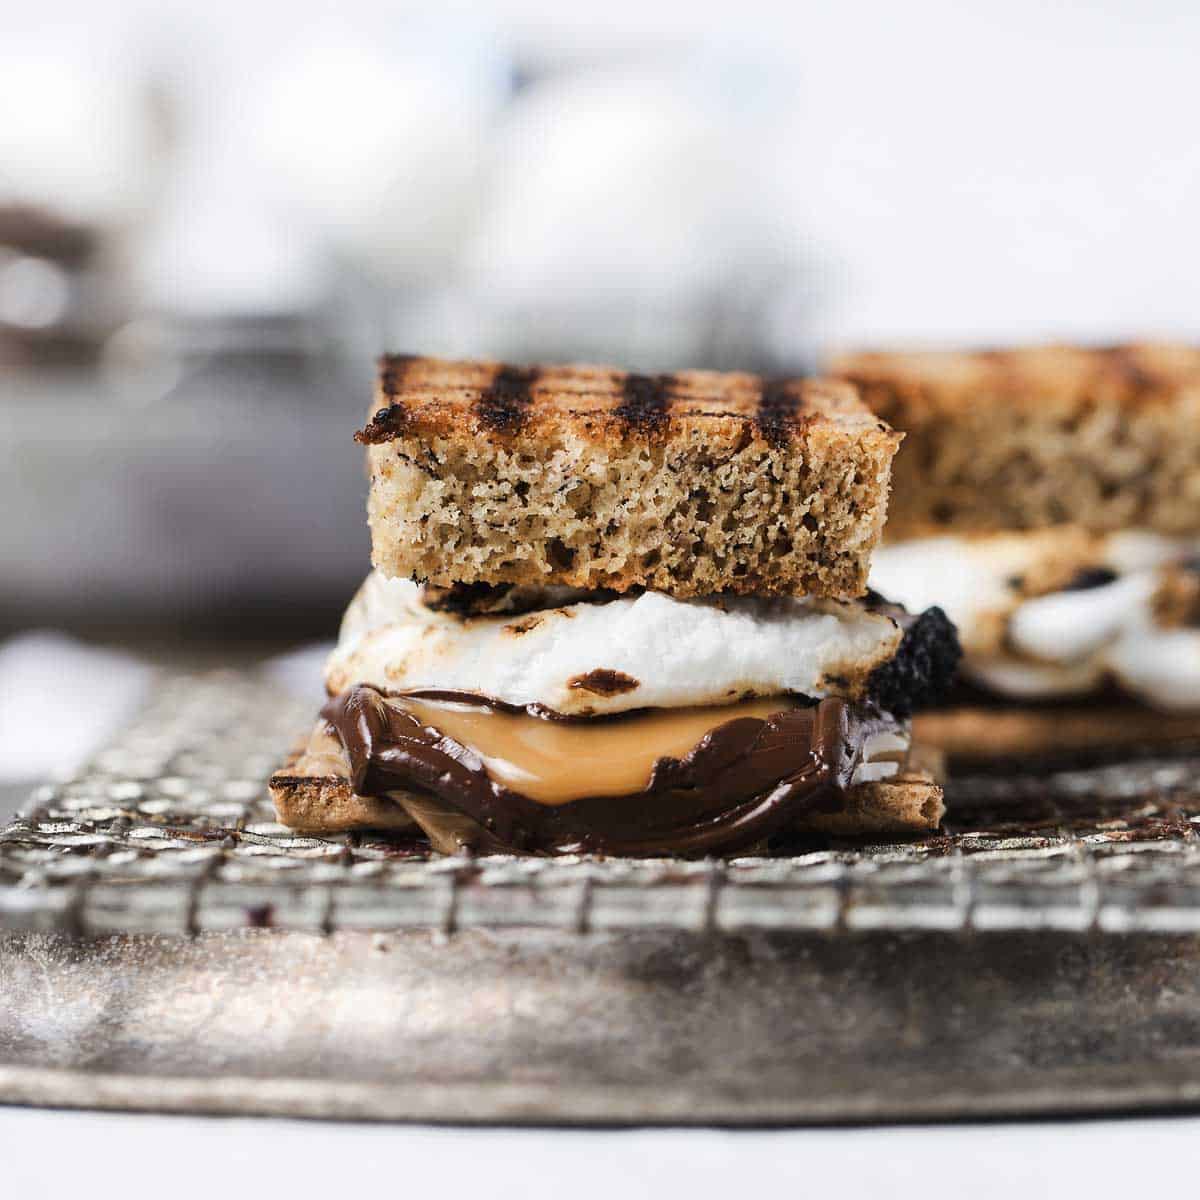 Elvis S'mores are a delicious gourmet s'mores recipe mashup of The King's favorite sandwich and the king of campfire desserts! S'mores recipe | how to make smores at home | Smores dessert | s'mores kit